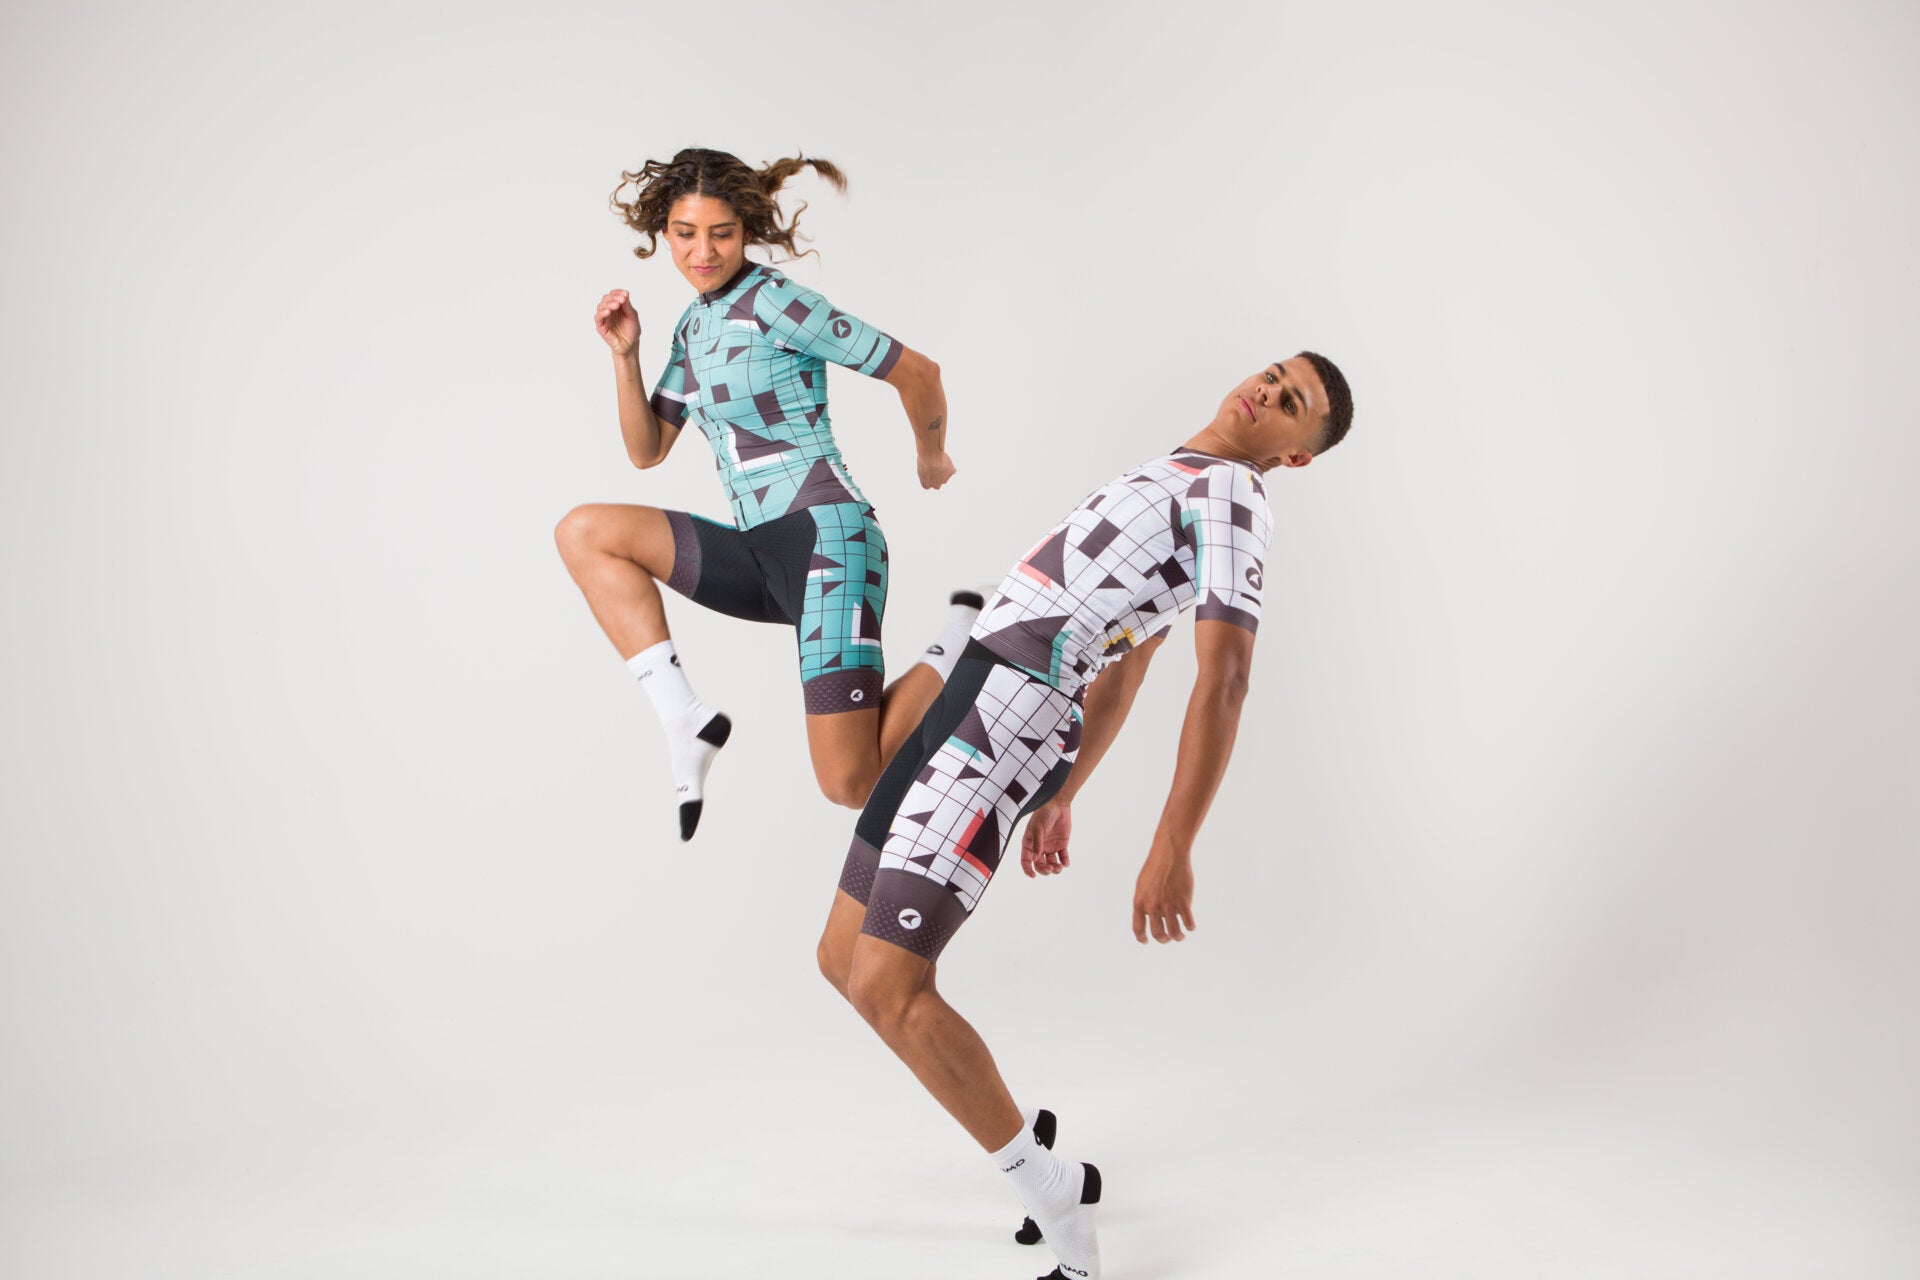 Pactimo Cycling Clothing presents PACTIMO x SANDRA FETTINGIS an Artist Series collaboration with Denver Based Artist and Muralist